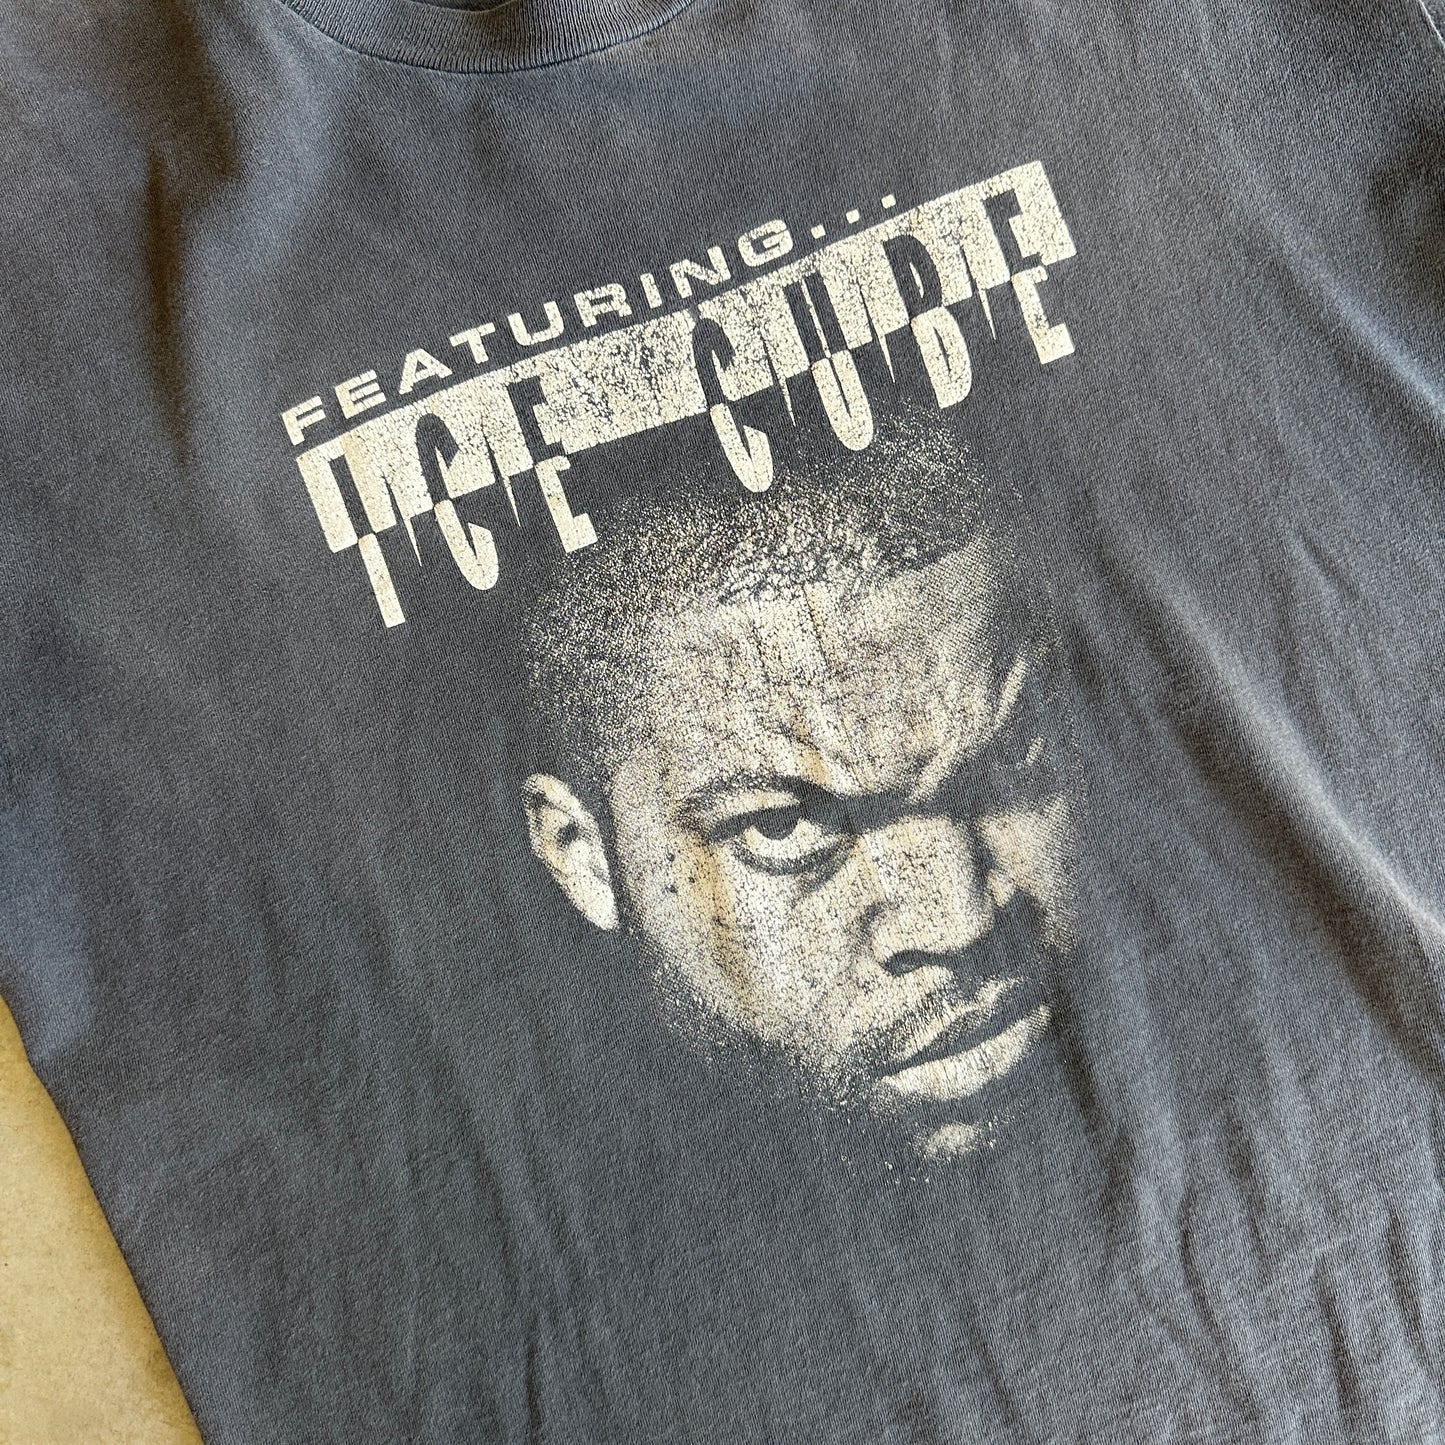 Featuring Ice Cube T-Shirt- XL